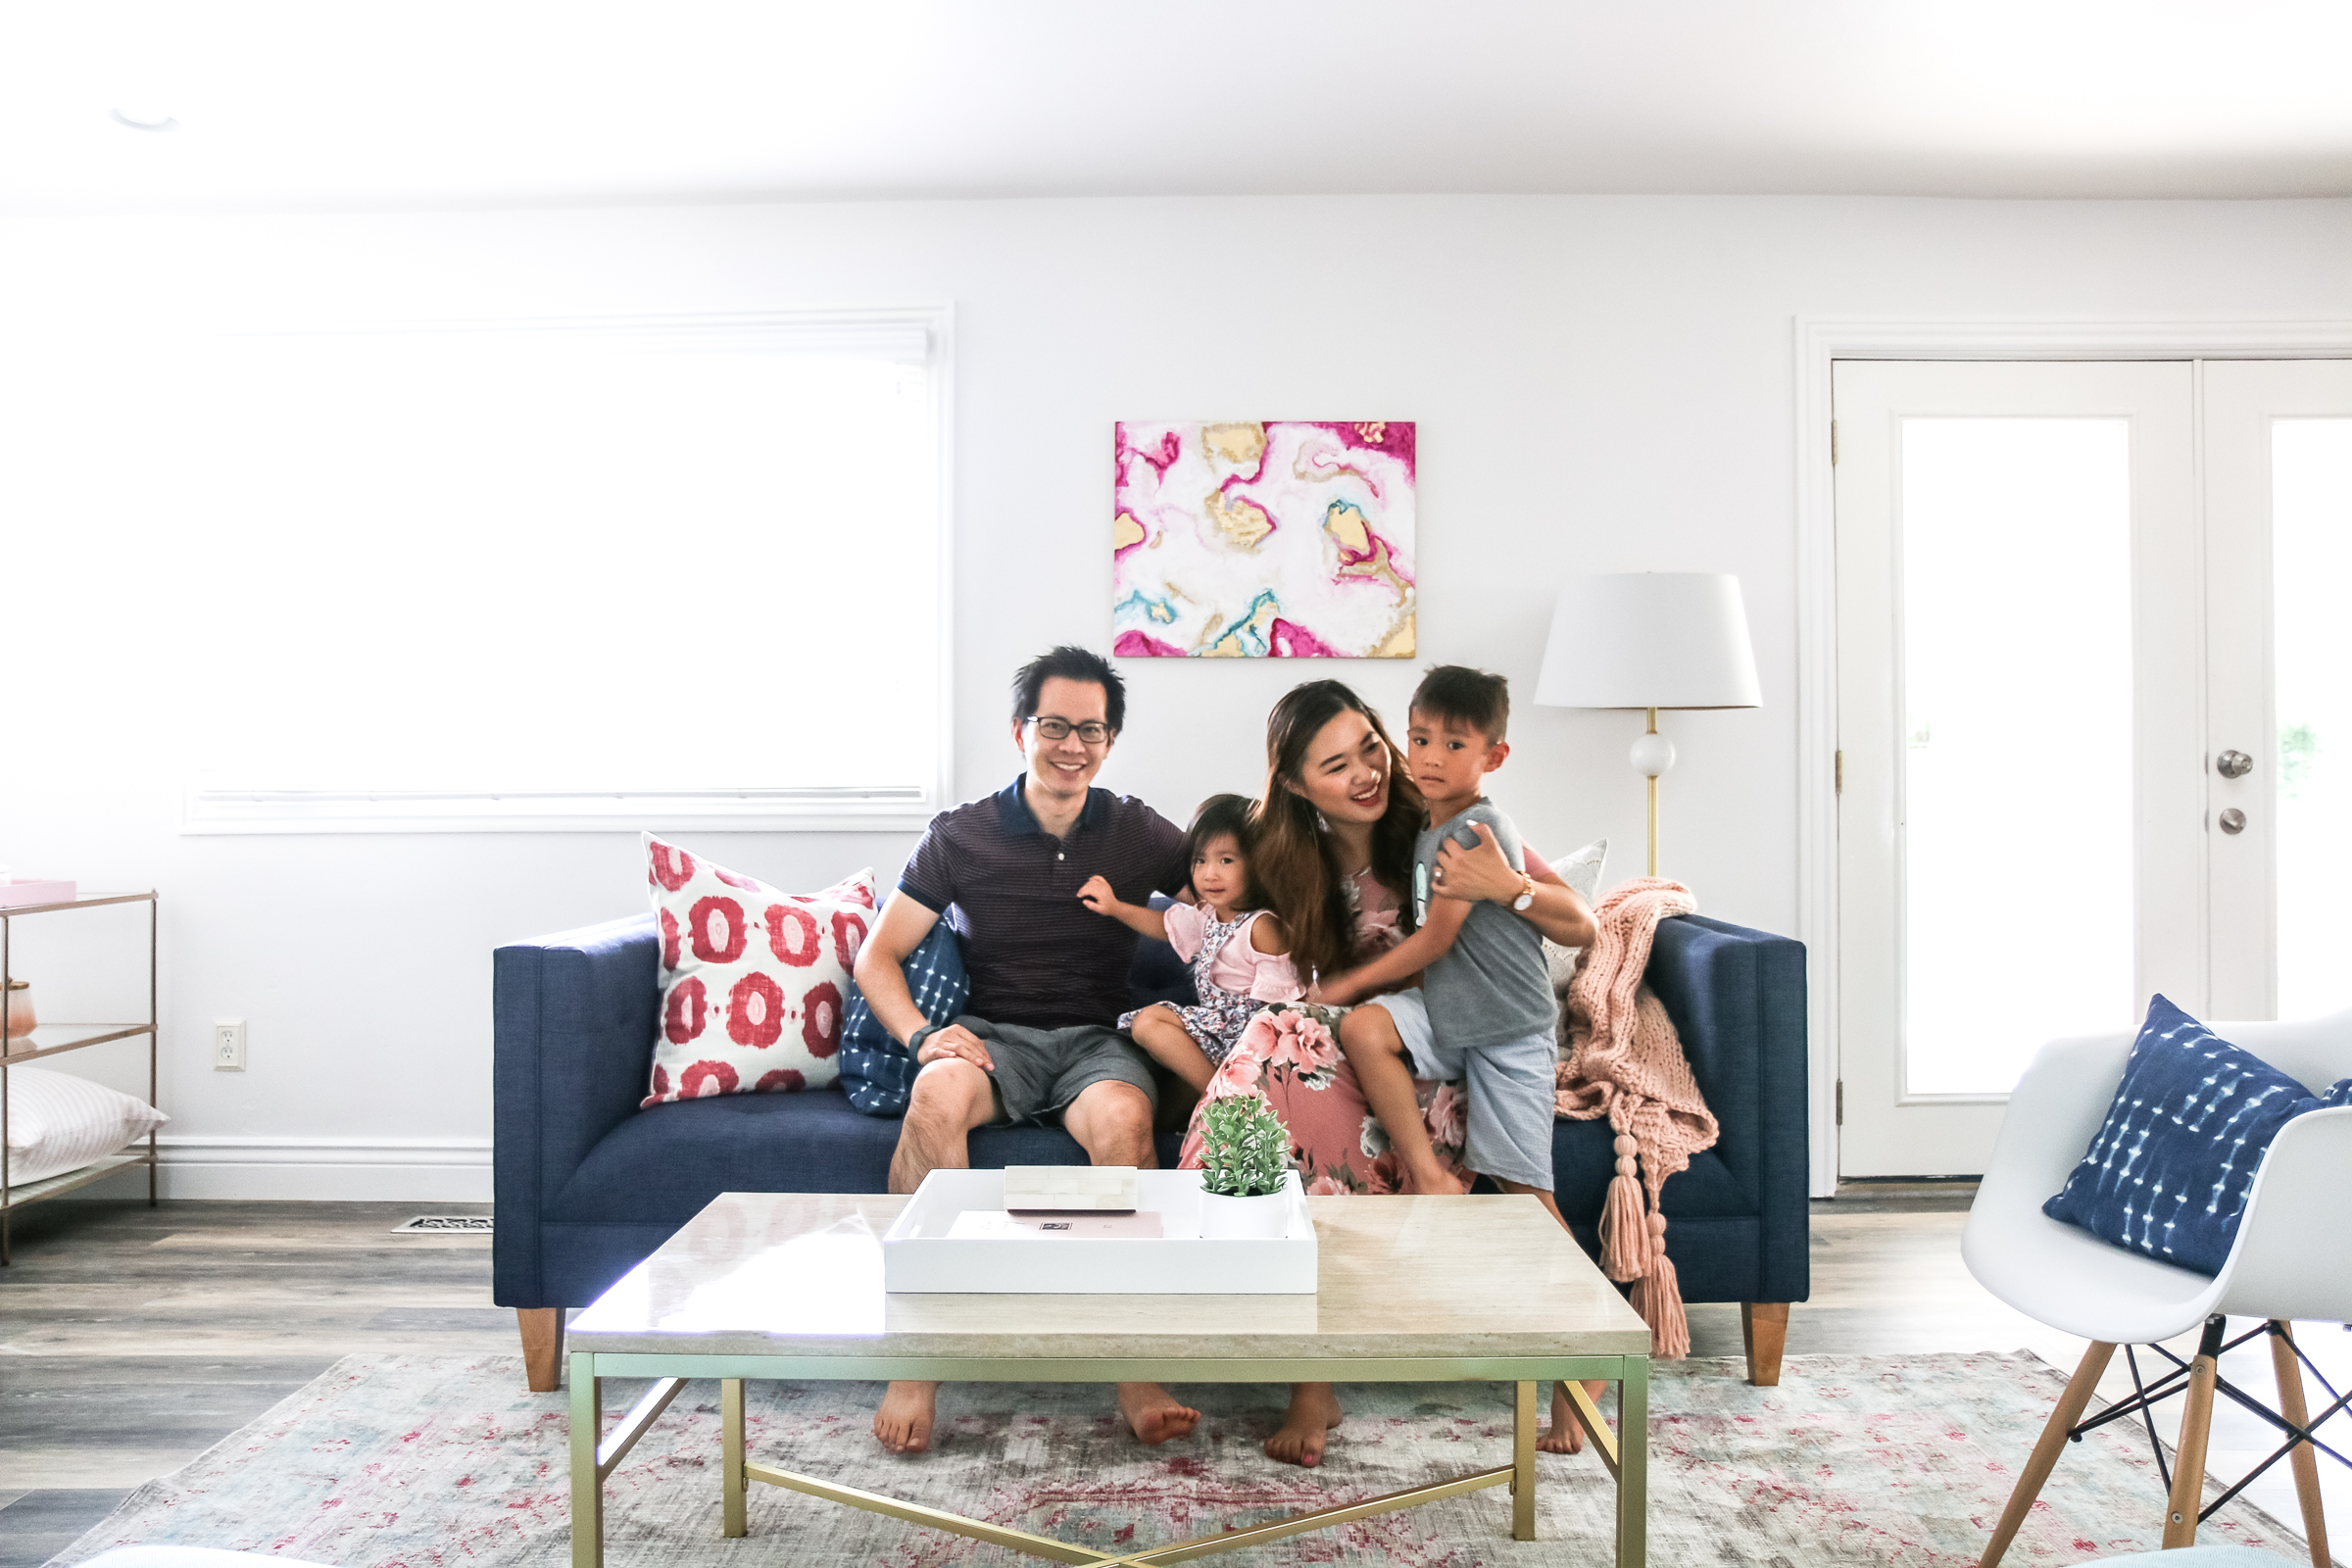 Our New Home Big Reveal: How We Styled Our Navy Couch by popular Utah blogger Sandy A La Mode